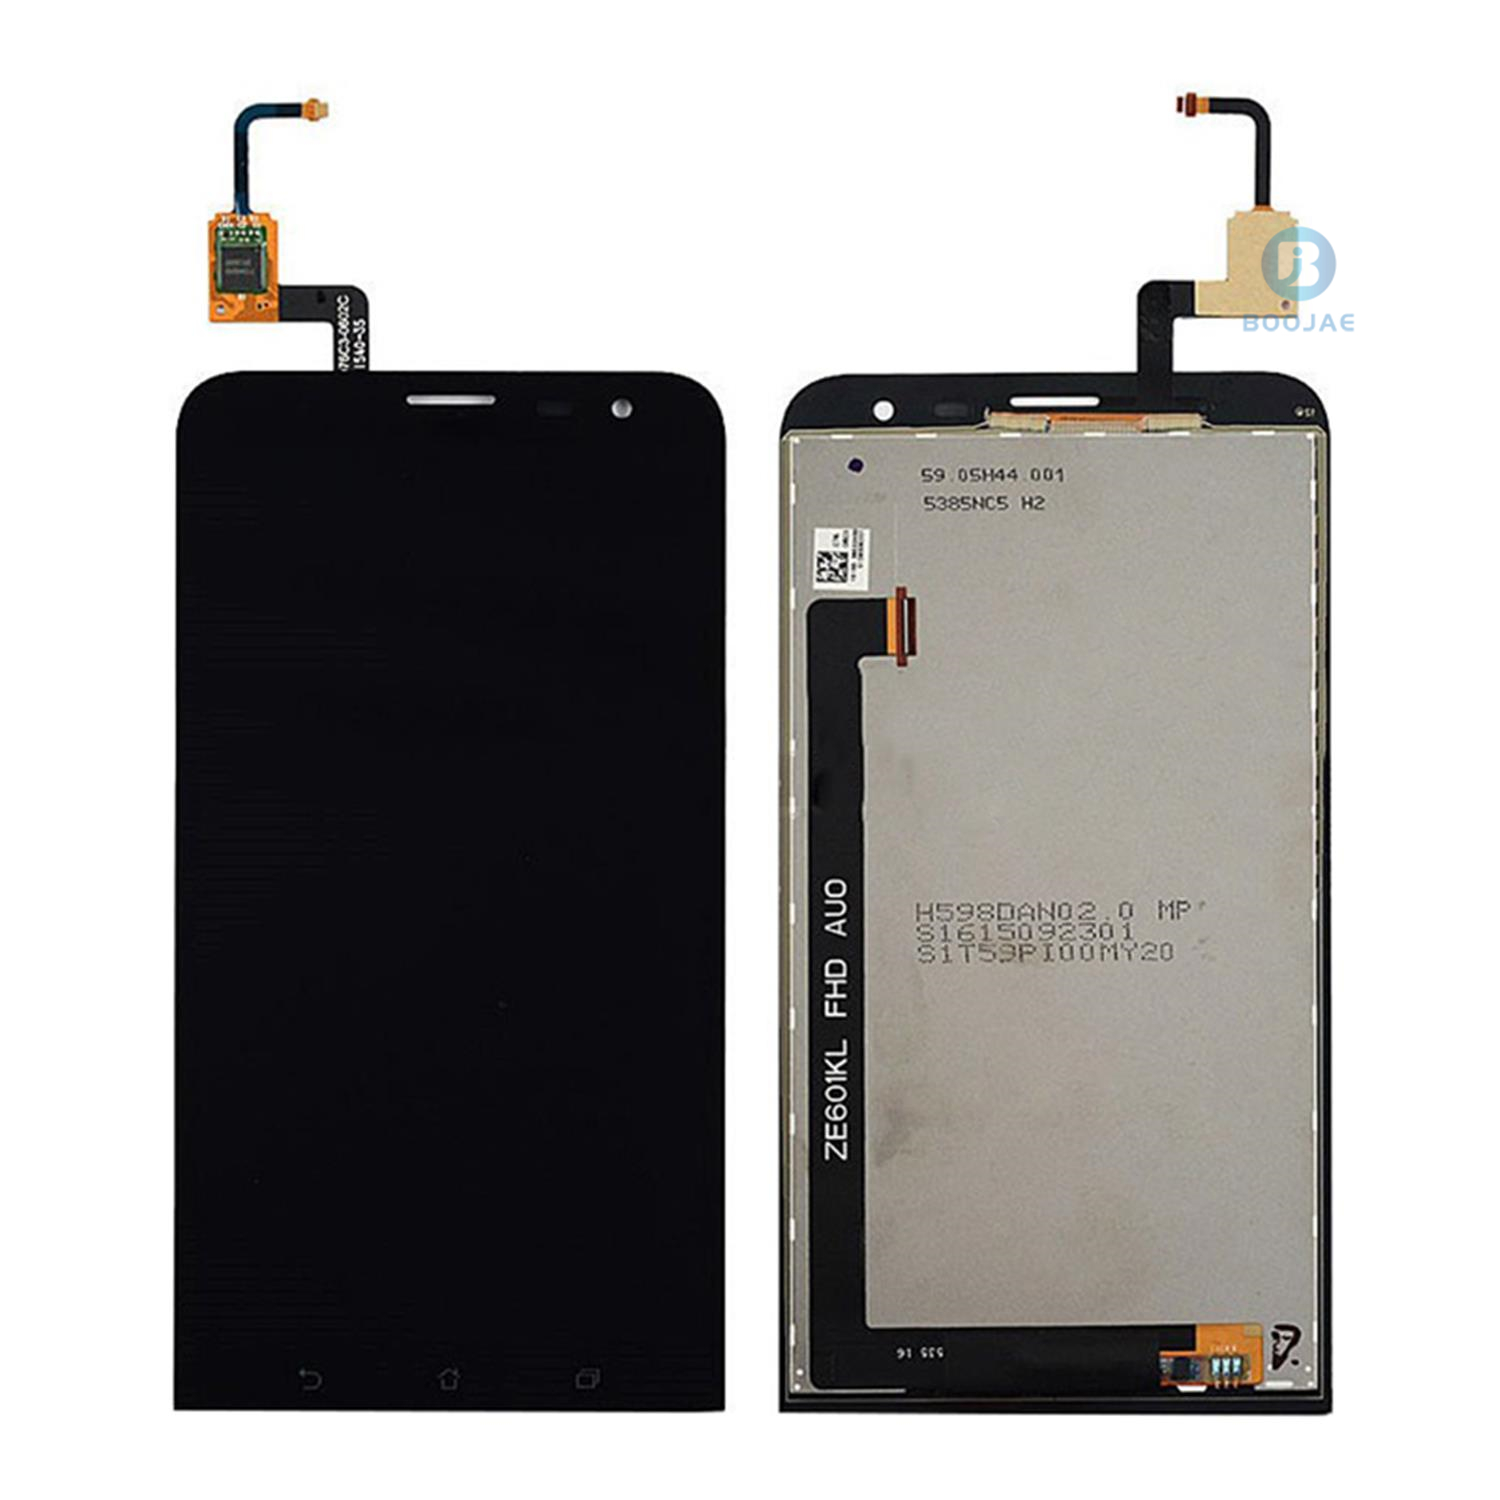 For Asus Zenfone ZE601KL LCD Screen Display and Touch Panel Digitizer Assembly Replacement